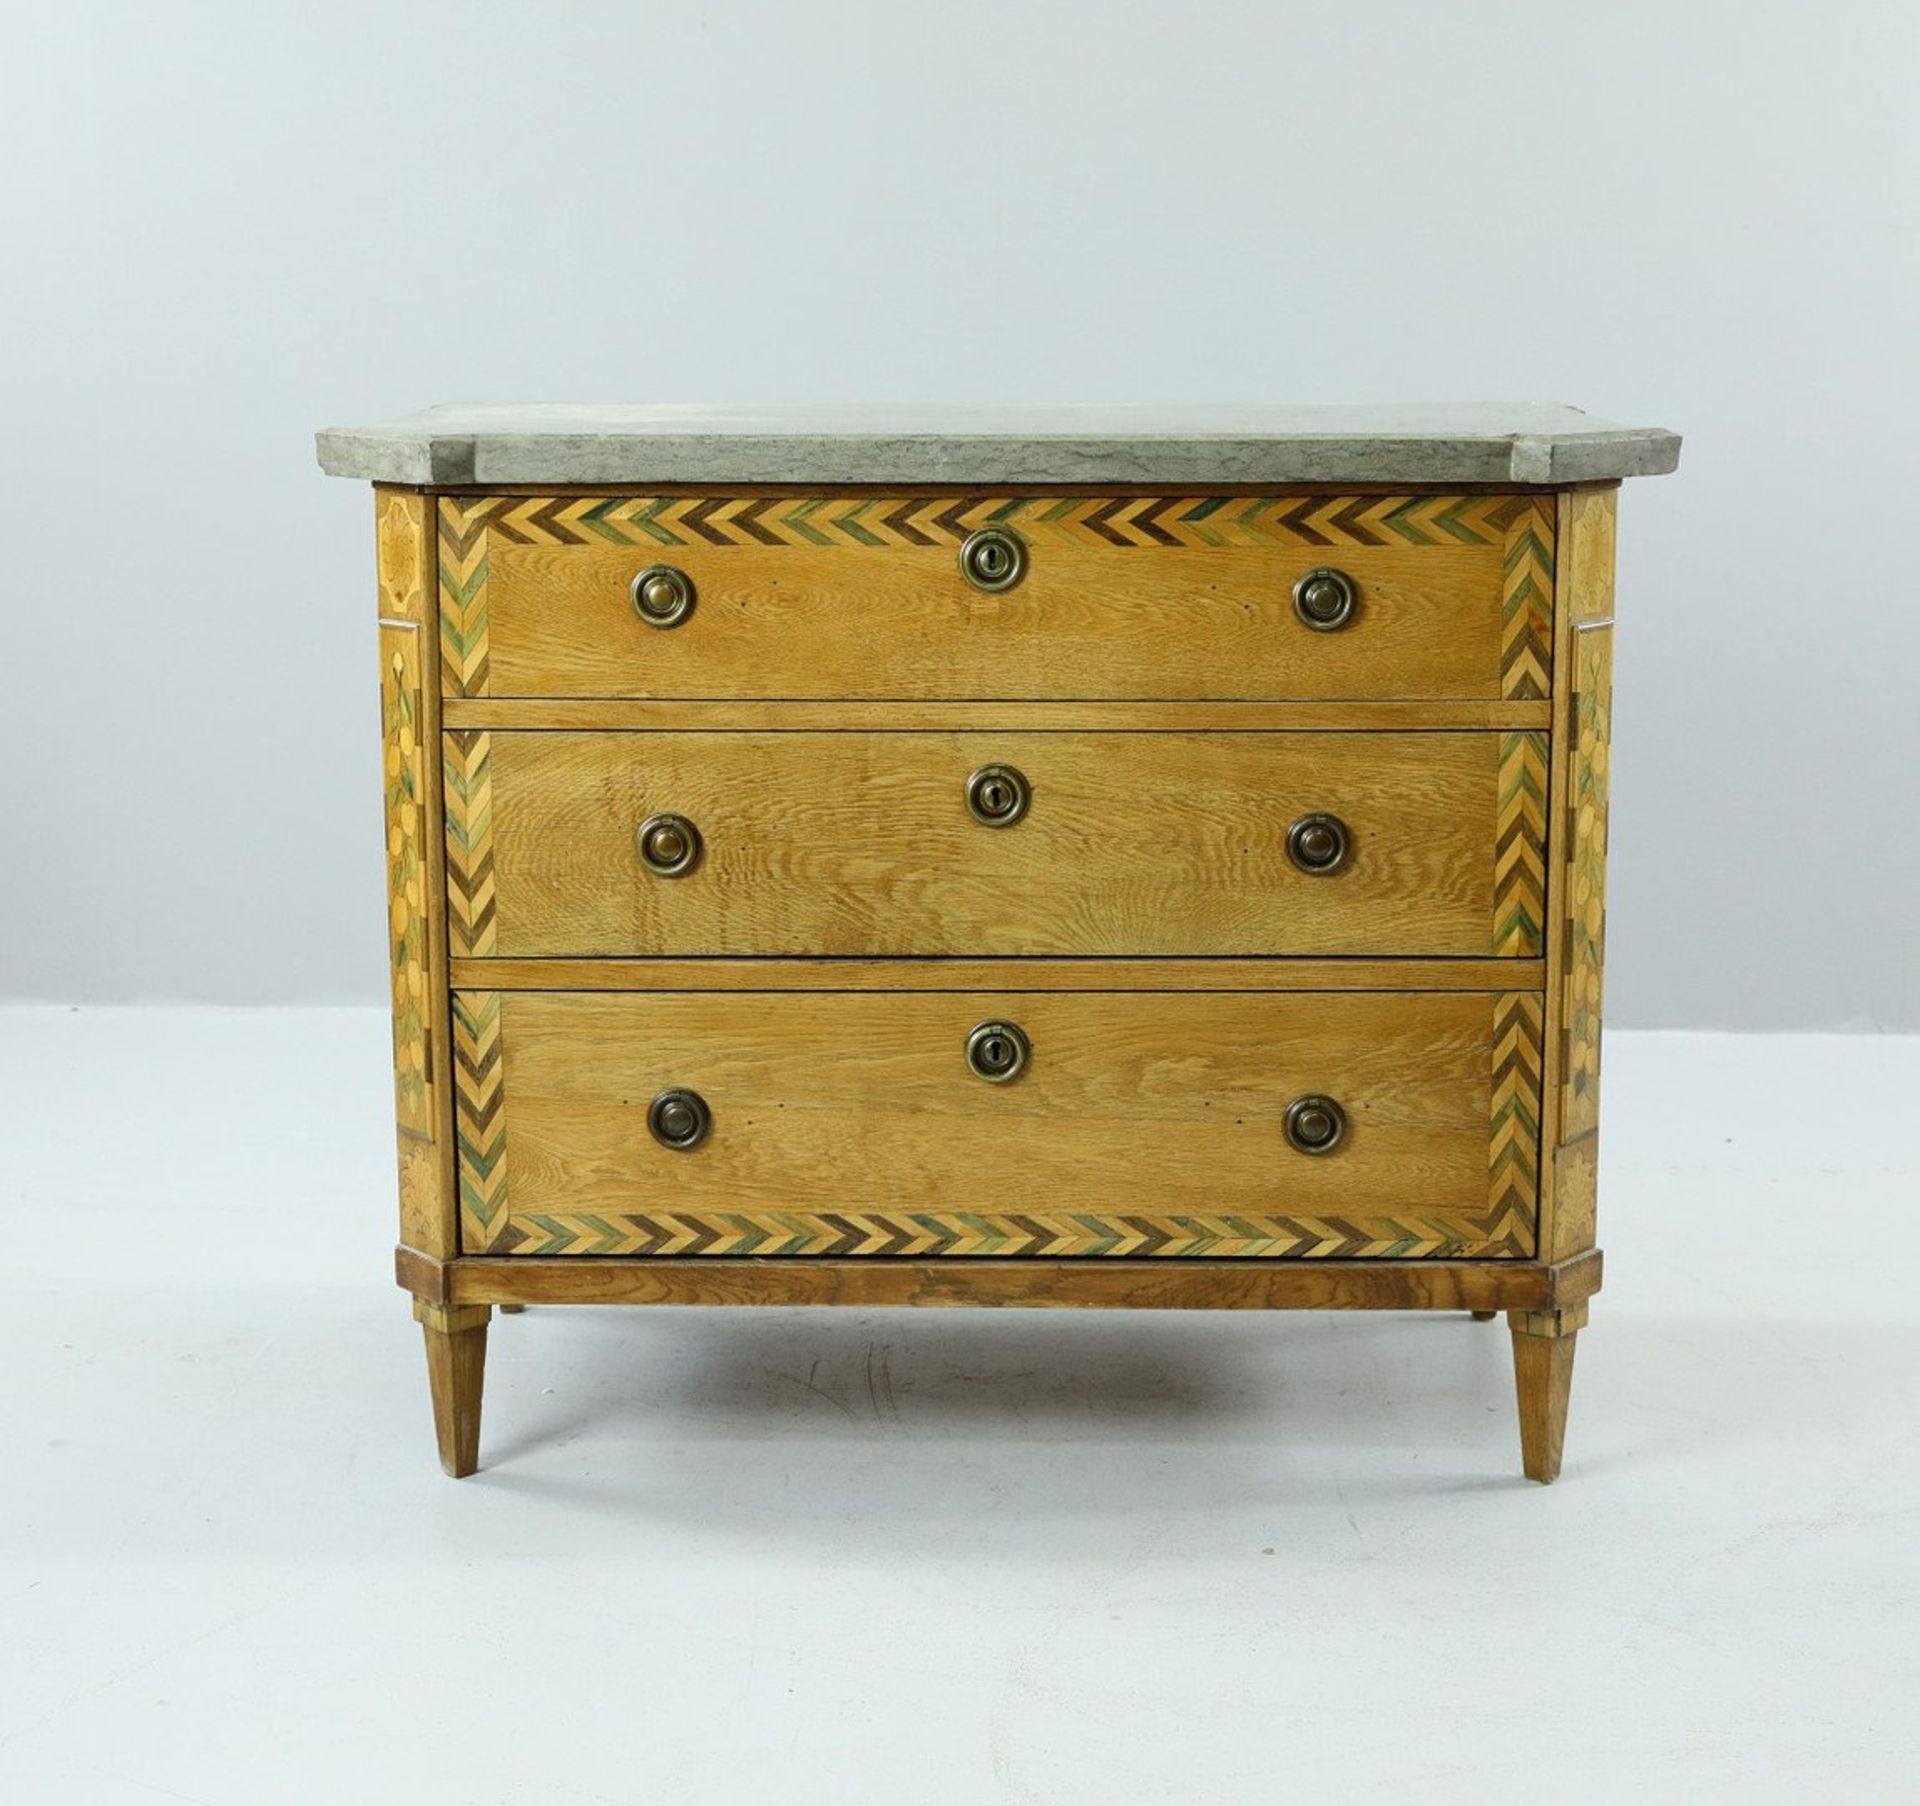 AN EARLY 19TH CENTURY SWEDISH GUSTAVIAN CHEST OF DRAWERS